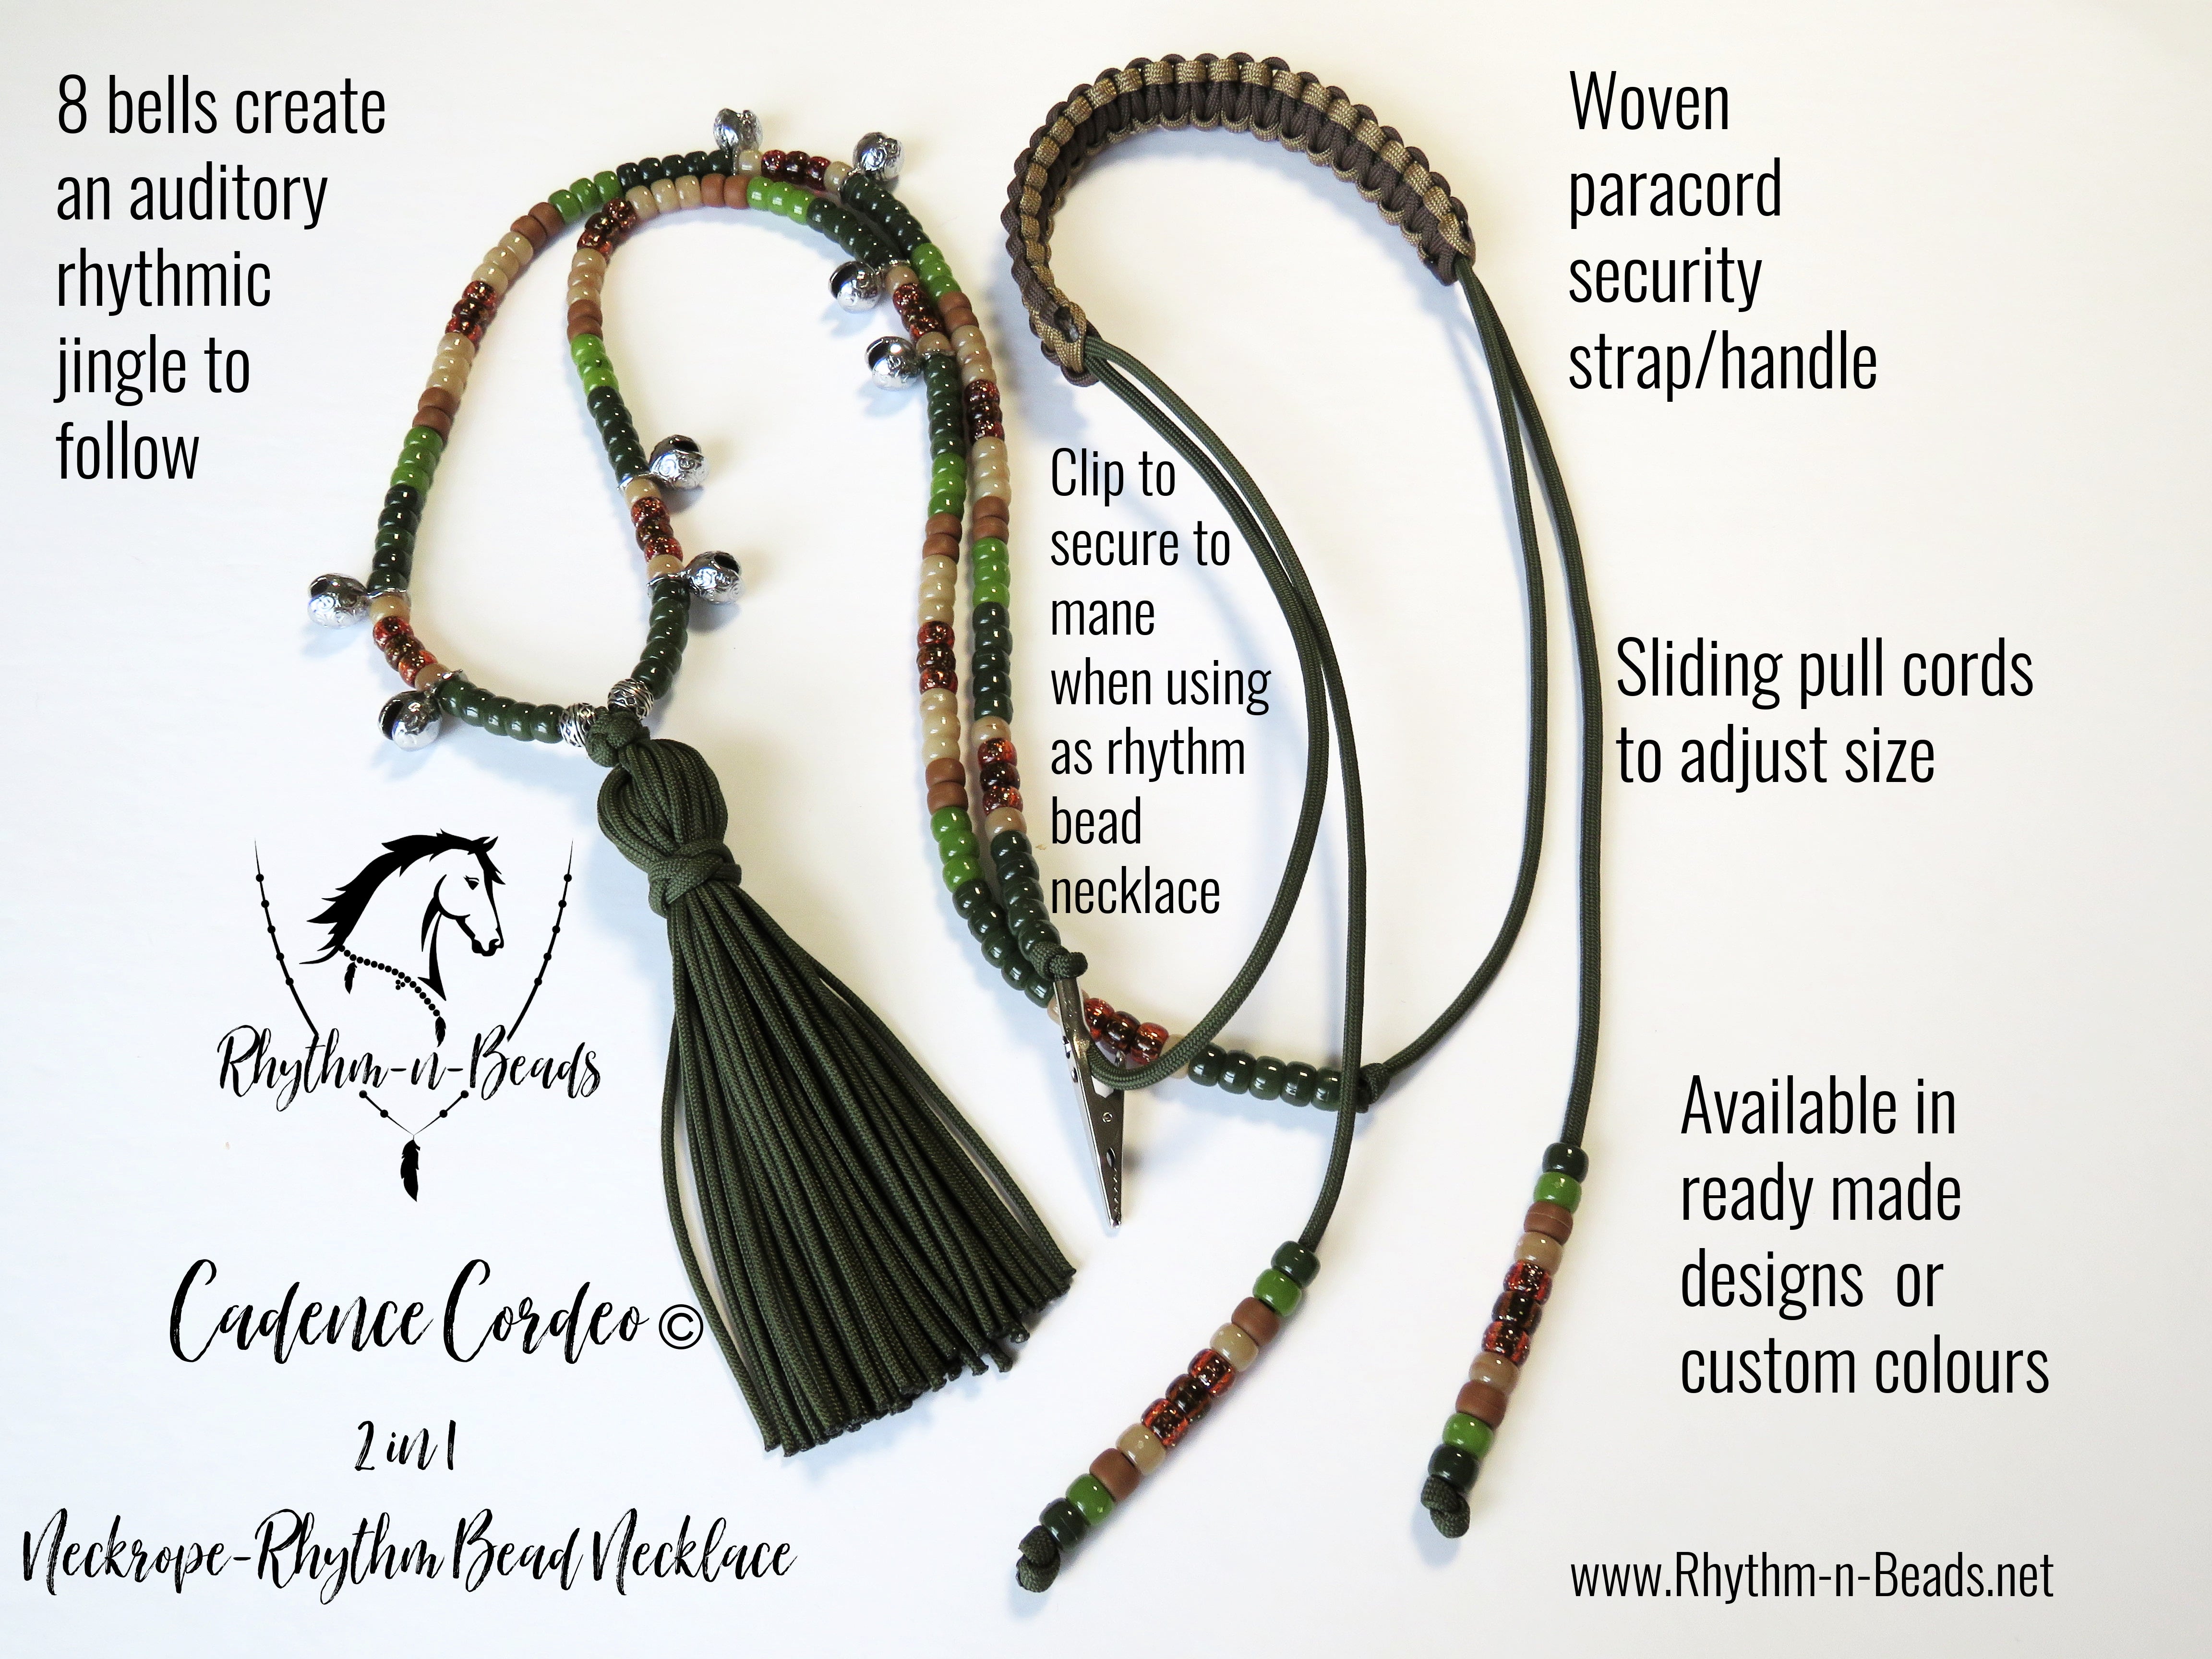 2 in 1 Cadence Cordeo© Neck Rope-Rhythm Bead Necklace - CALM & CONNECTED